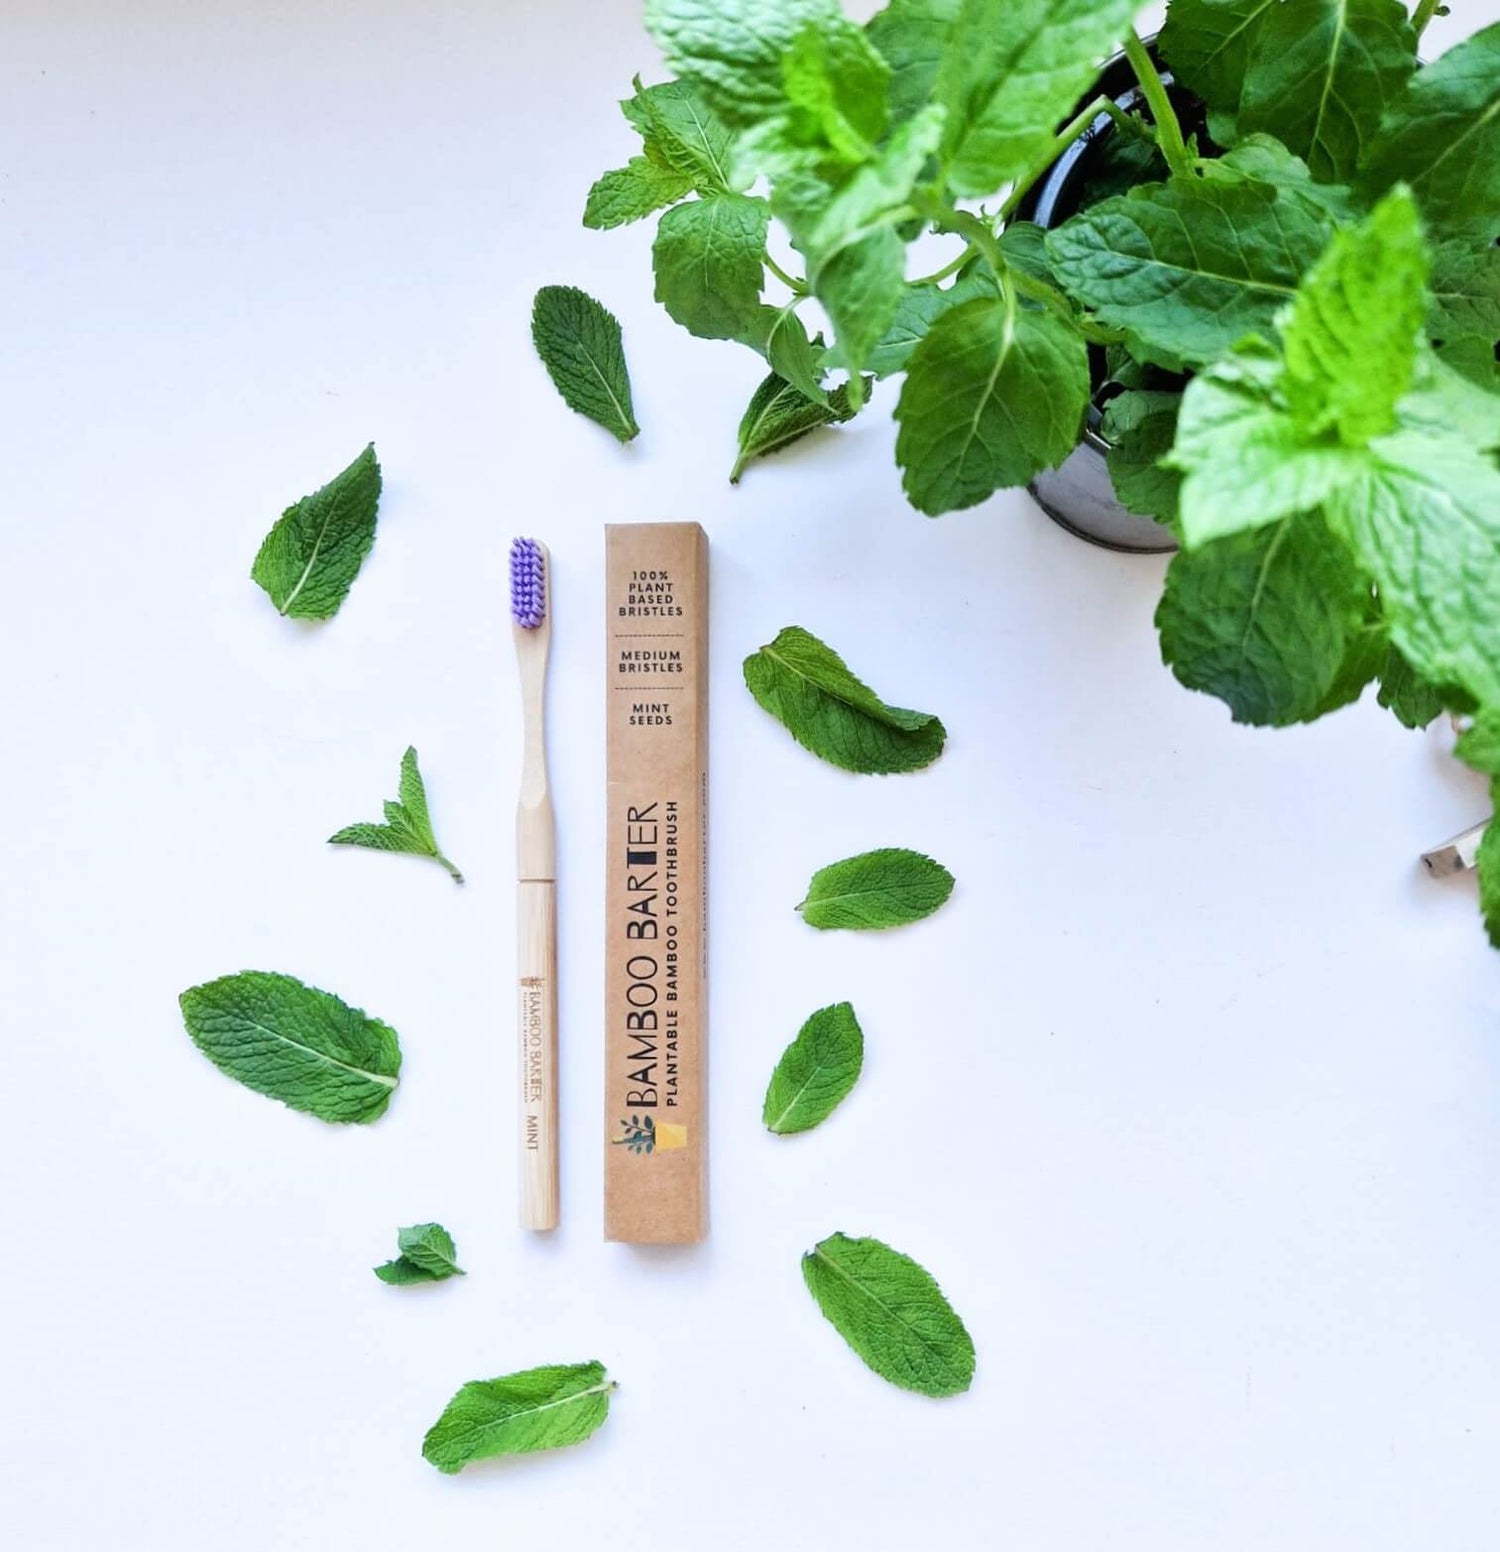 A purple bristle bamboo toothbrush next to a mint plant and mint leafs.